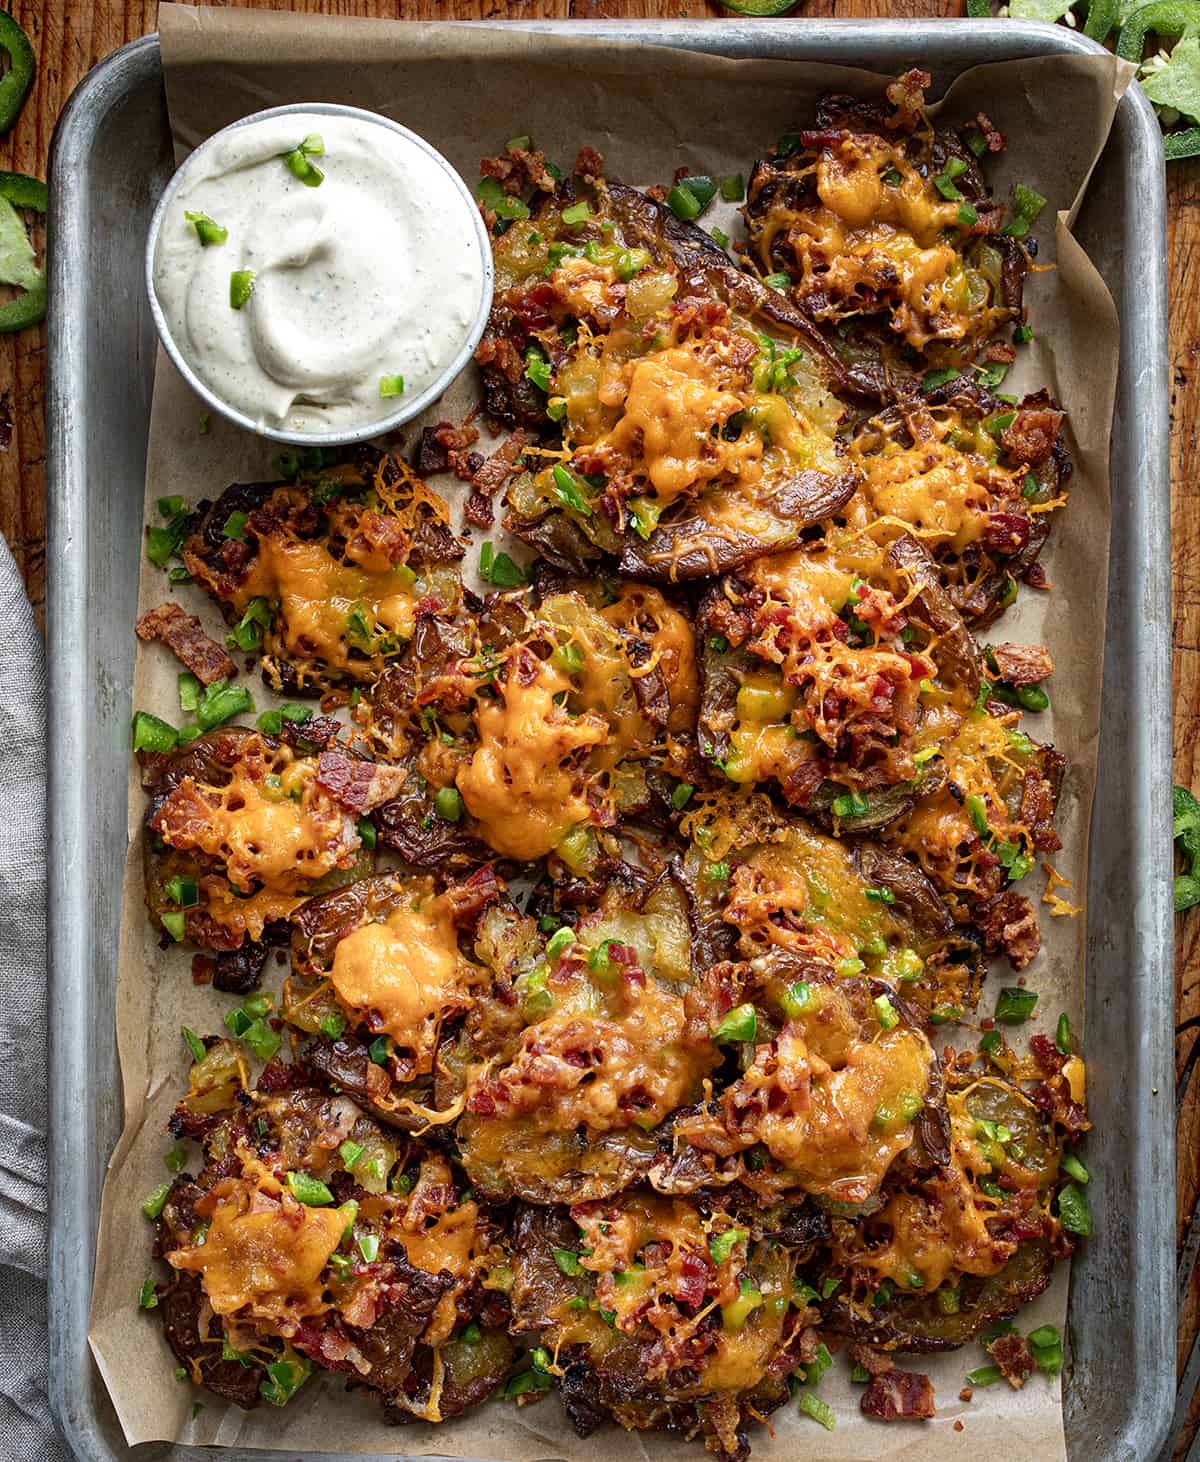 Tray of Jalapeno Popper Smashed Potatoes with Sauce from Overhead.